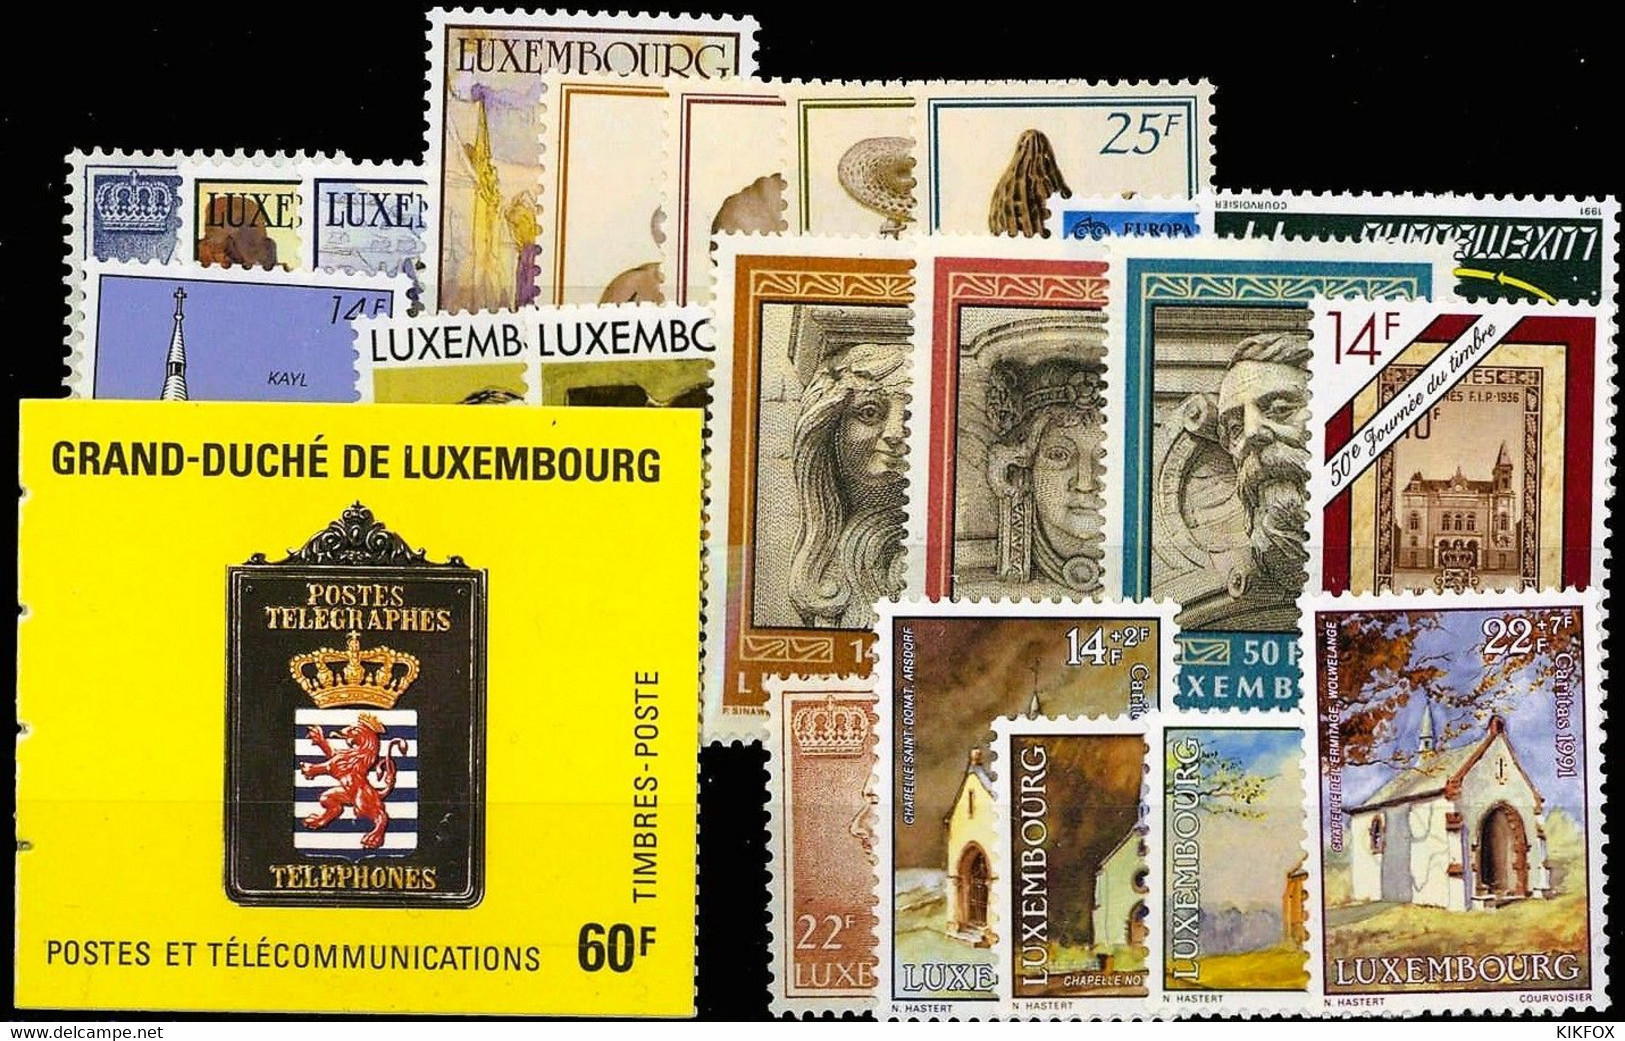 LUXEMBOURG,LUXEMBURG,1991, Mi 1263-1287  ,YT 1213-1237, JAHRGANG KPL , Complete Year + MH, POSTFRISCH - Années Complètes